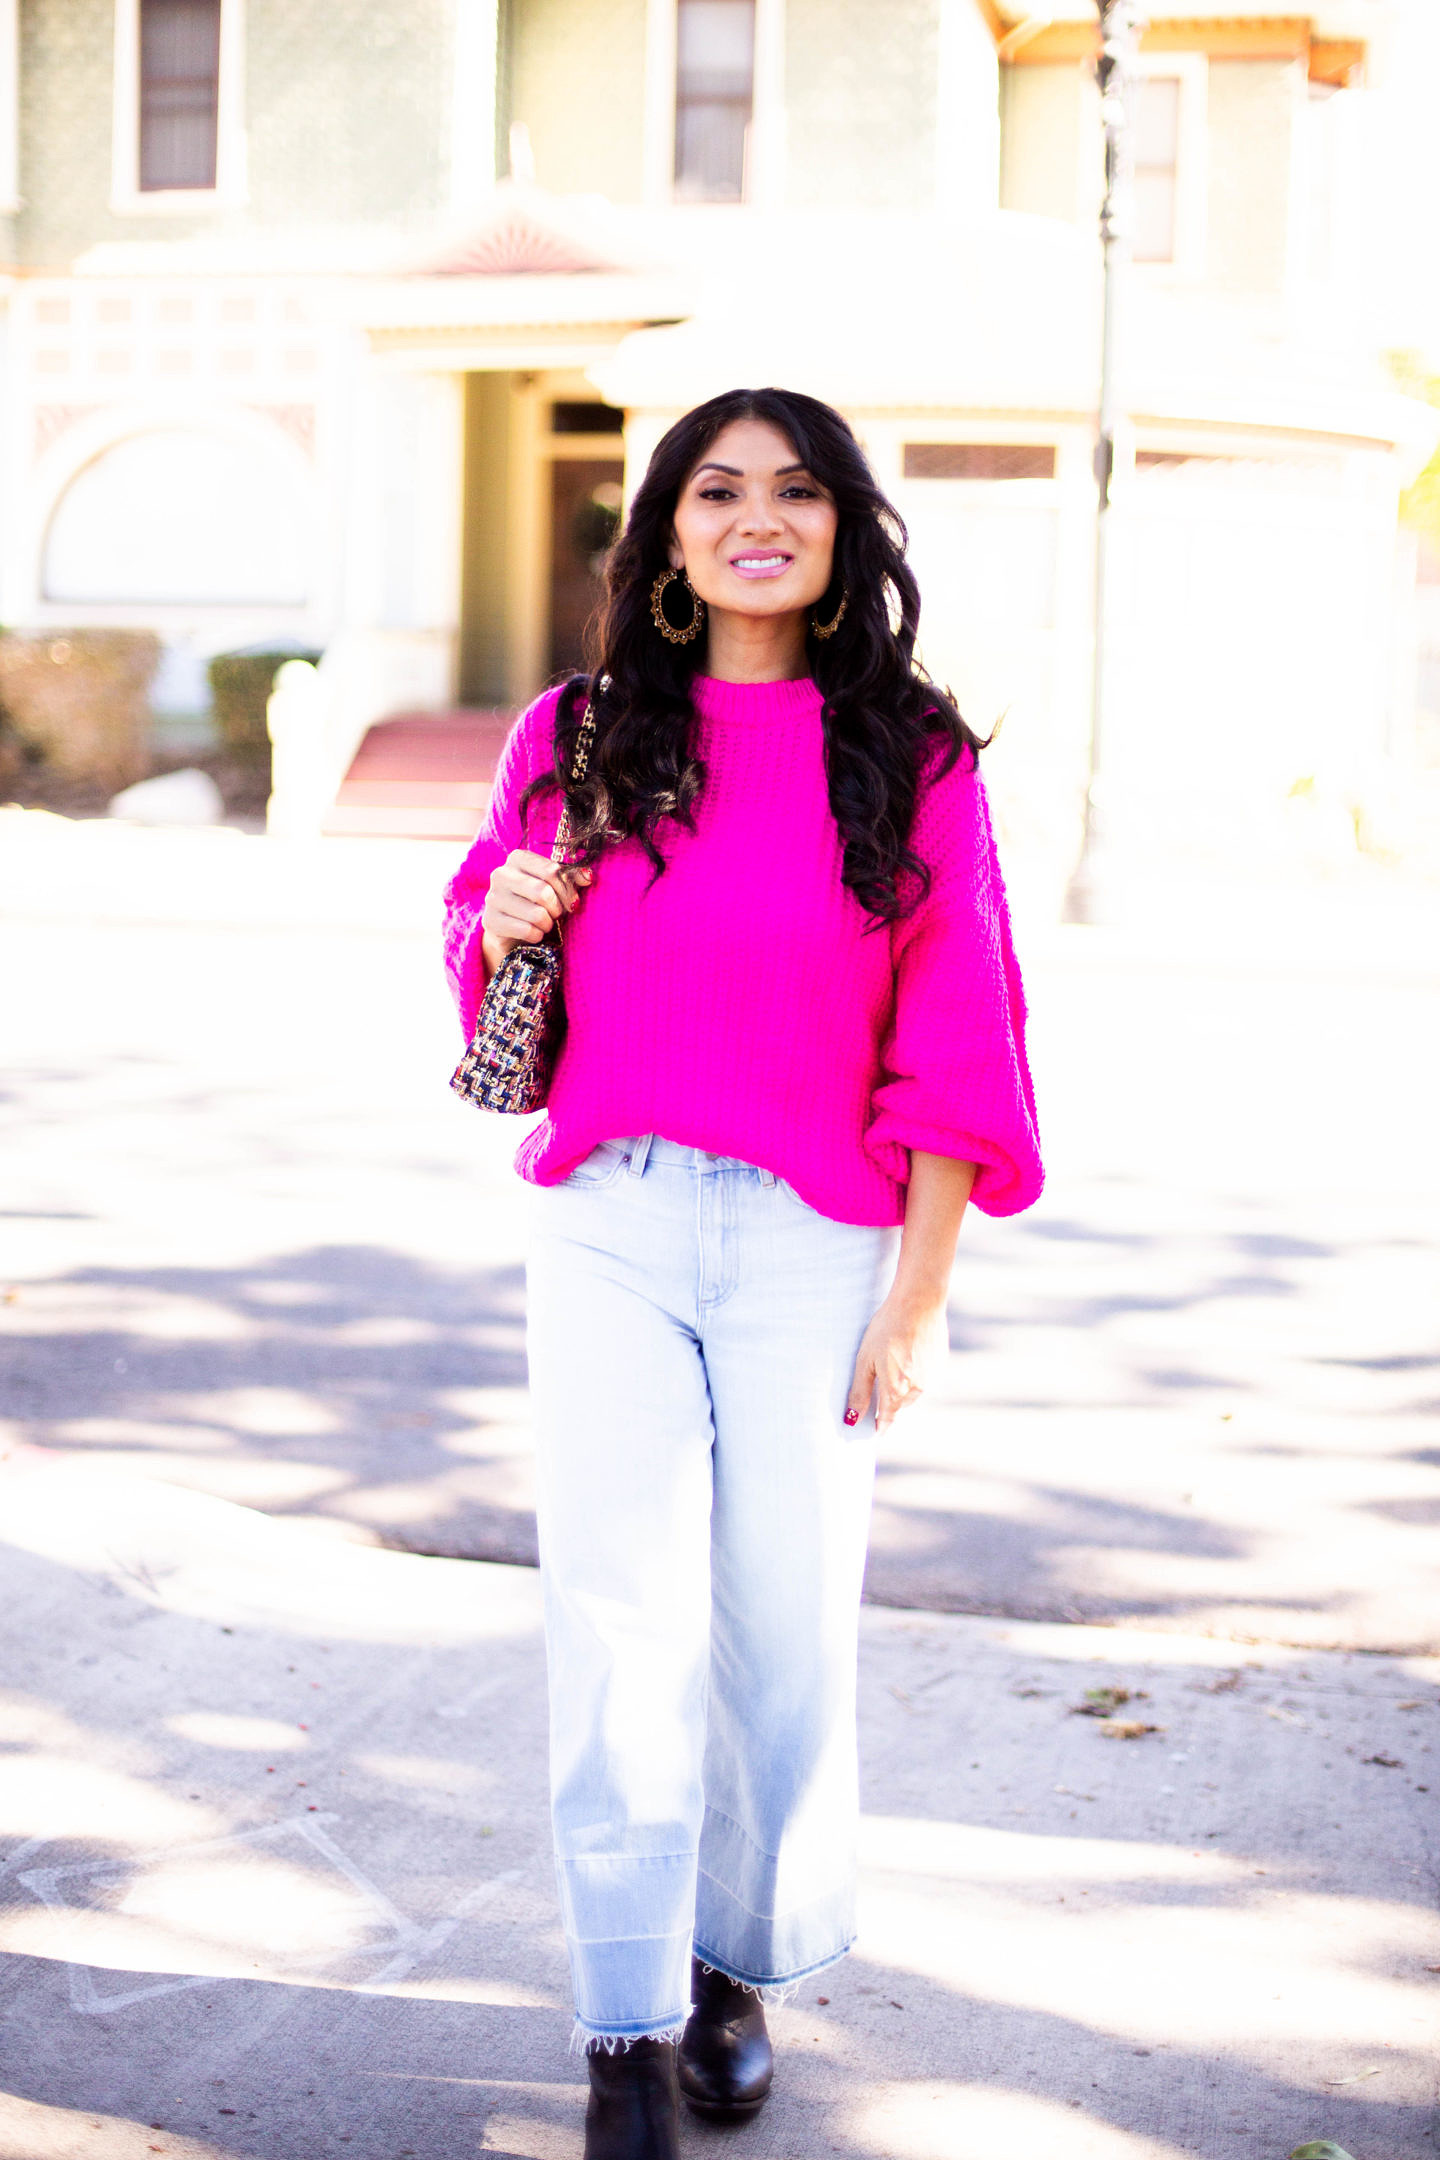 Bookmark this post ASAP if you have been looking to add a pop of color to your fall/winter wardrobe? Orange County Blogger Debbie Savage is sharing why you need to add a hot pink sweater to your wardrobe ASAP! See why here!